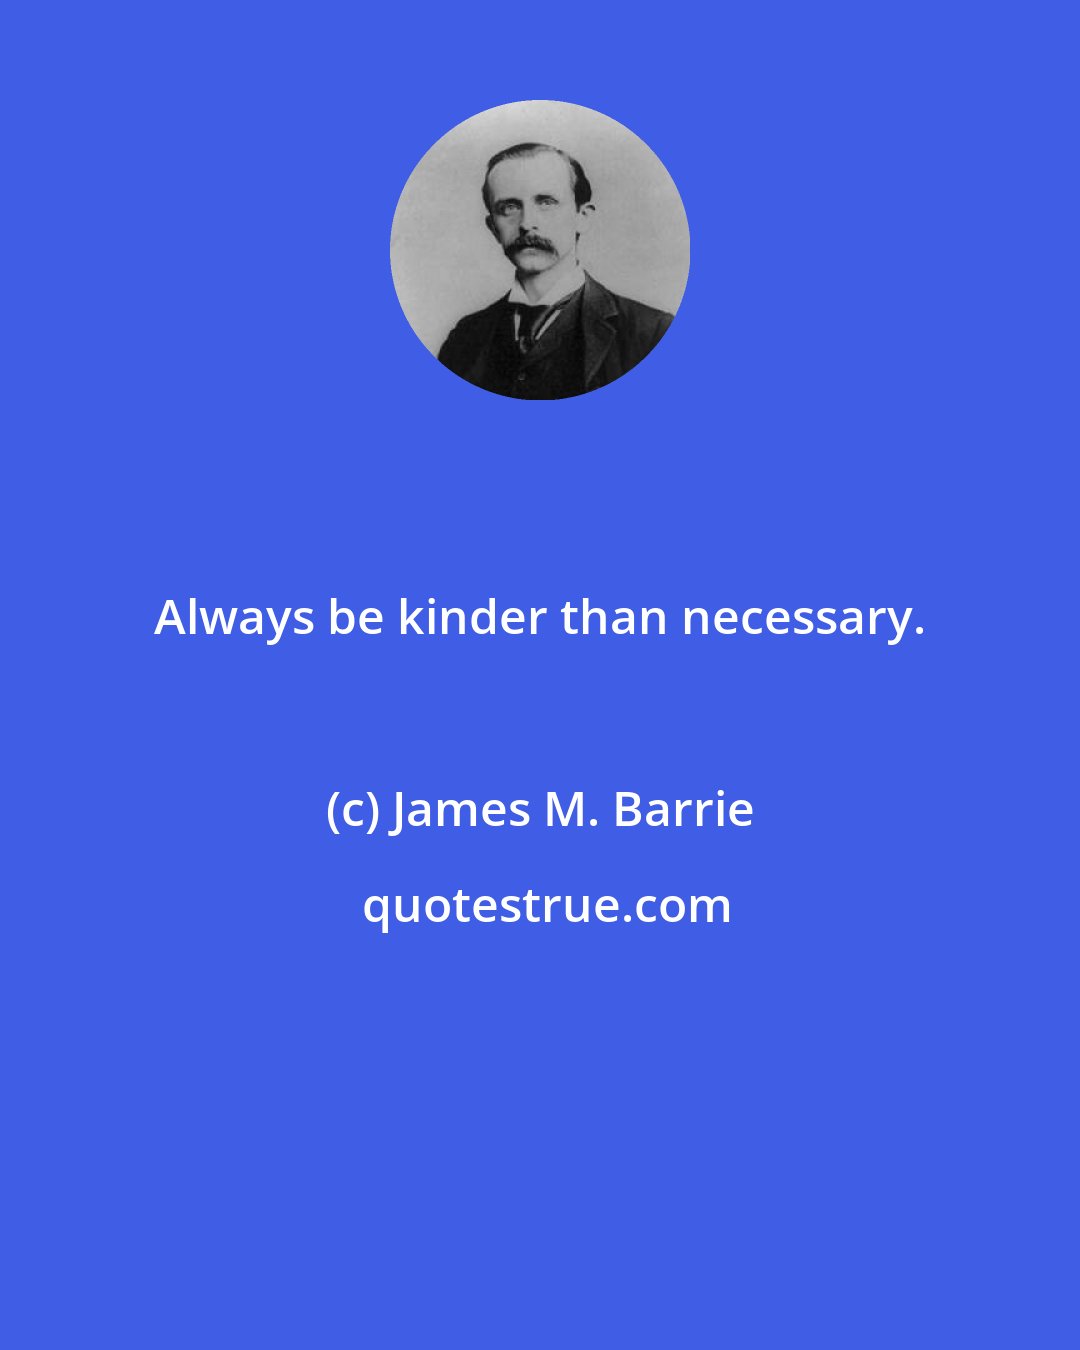 James M. Barrie: Always be kinder than necessary.